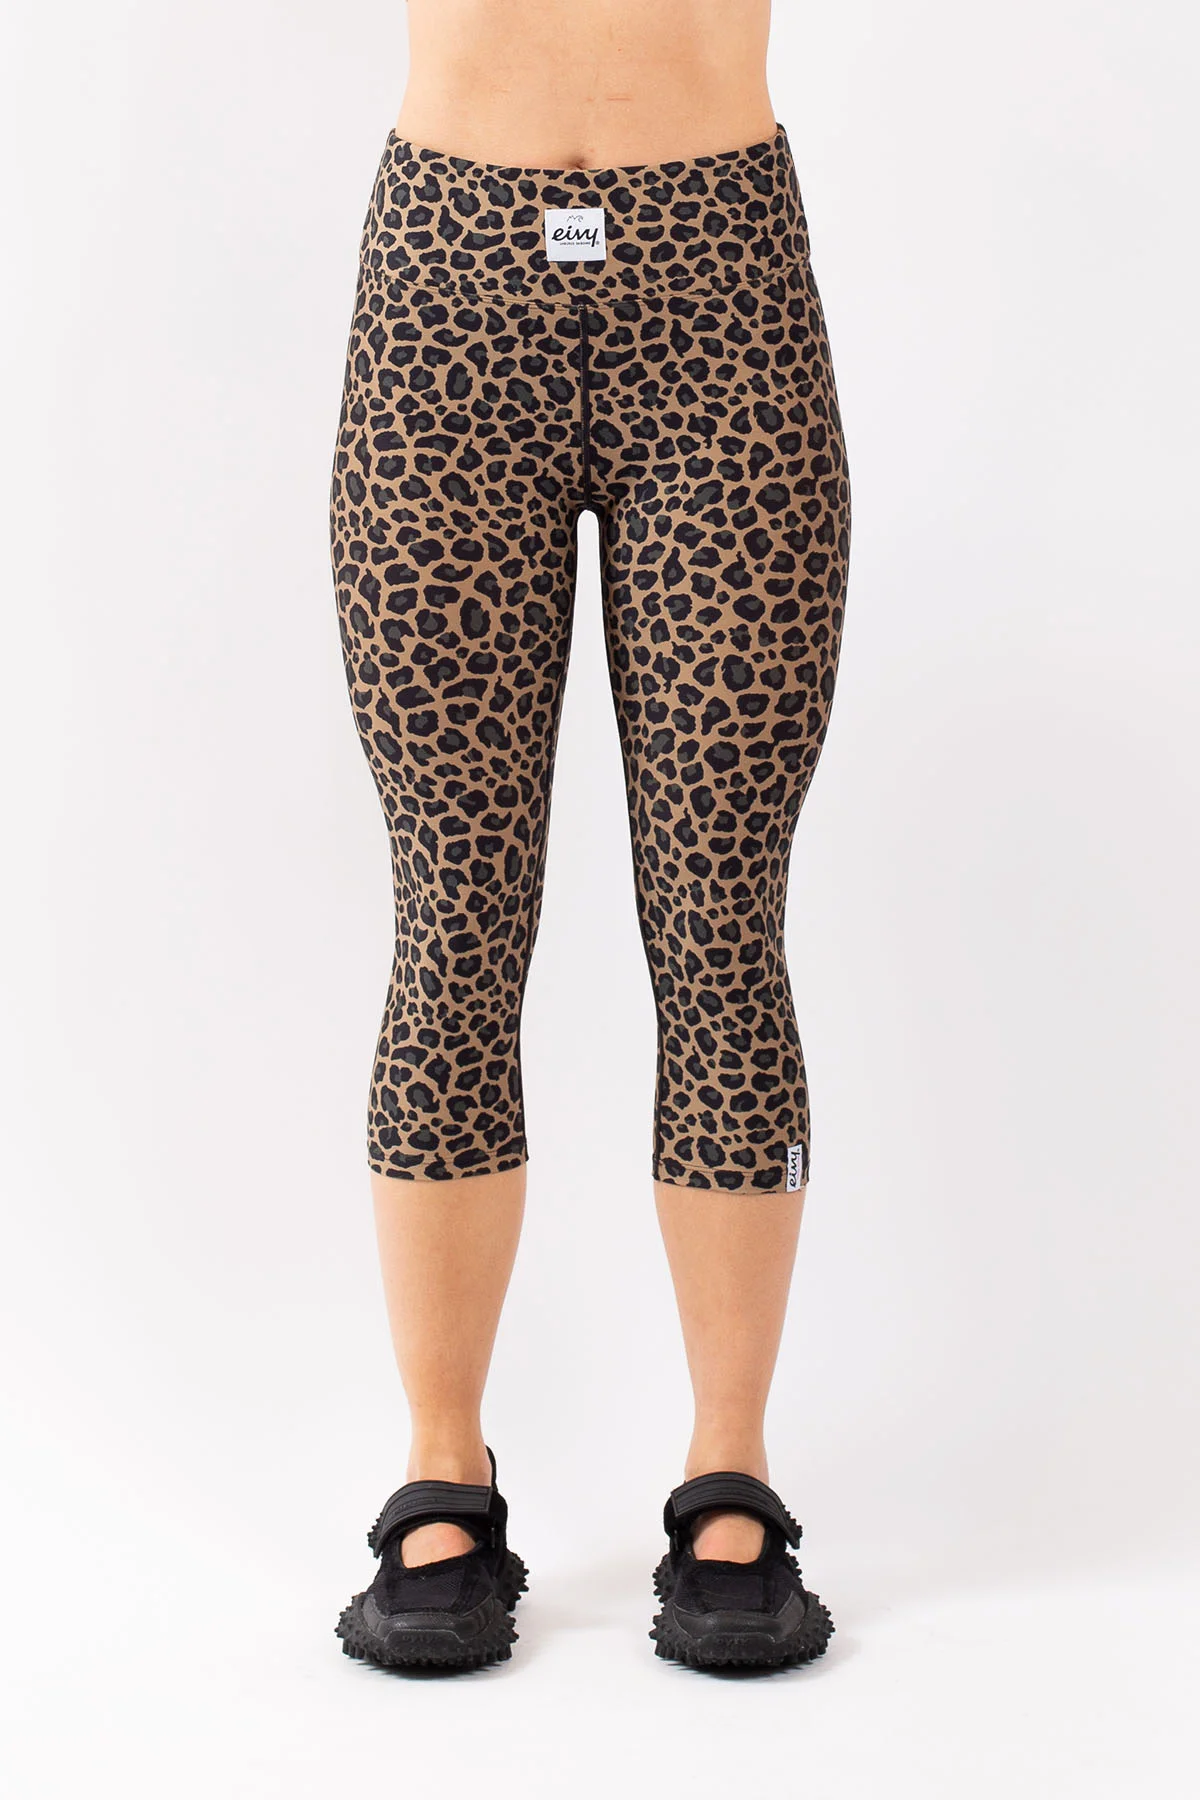 https://www.eivy.co/image/7078/Base-layer-icecold-tights-3-4-Leopard-Front-2.webp